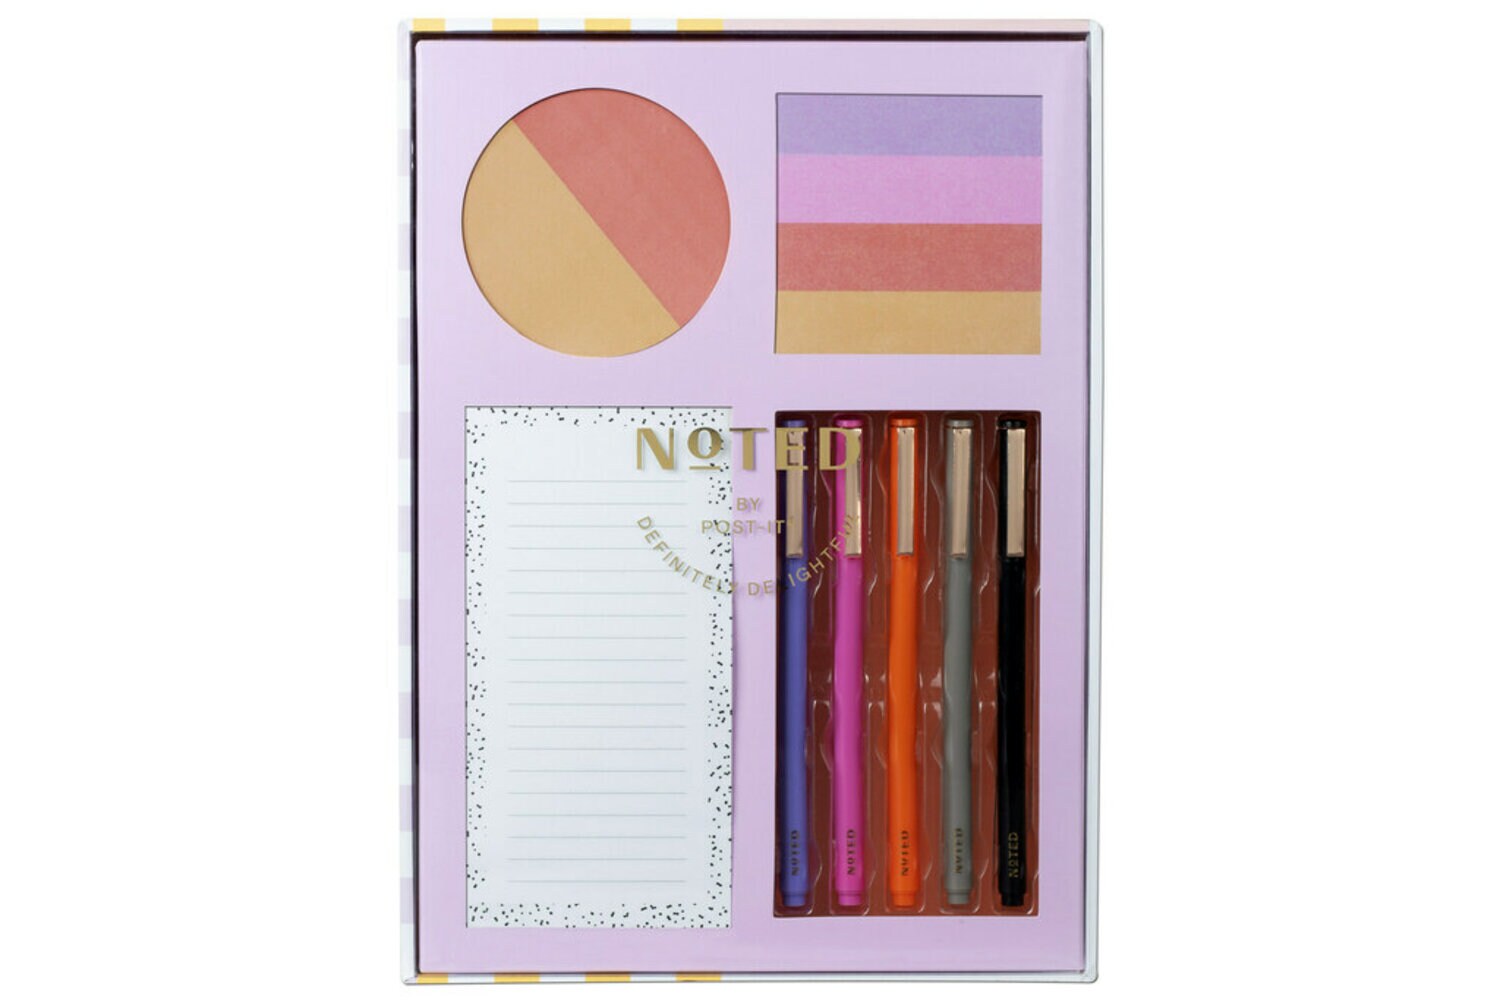 7100271995 - Post-it Back to School Gift Box NTDBOX-SM-OR Assorted Gift Box